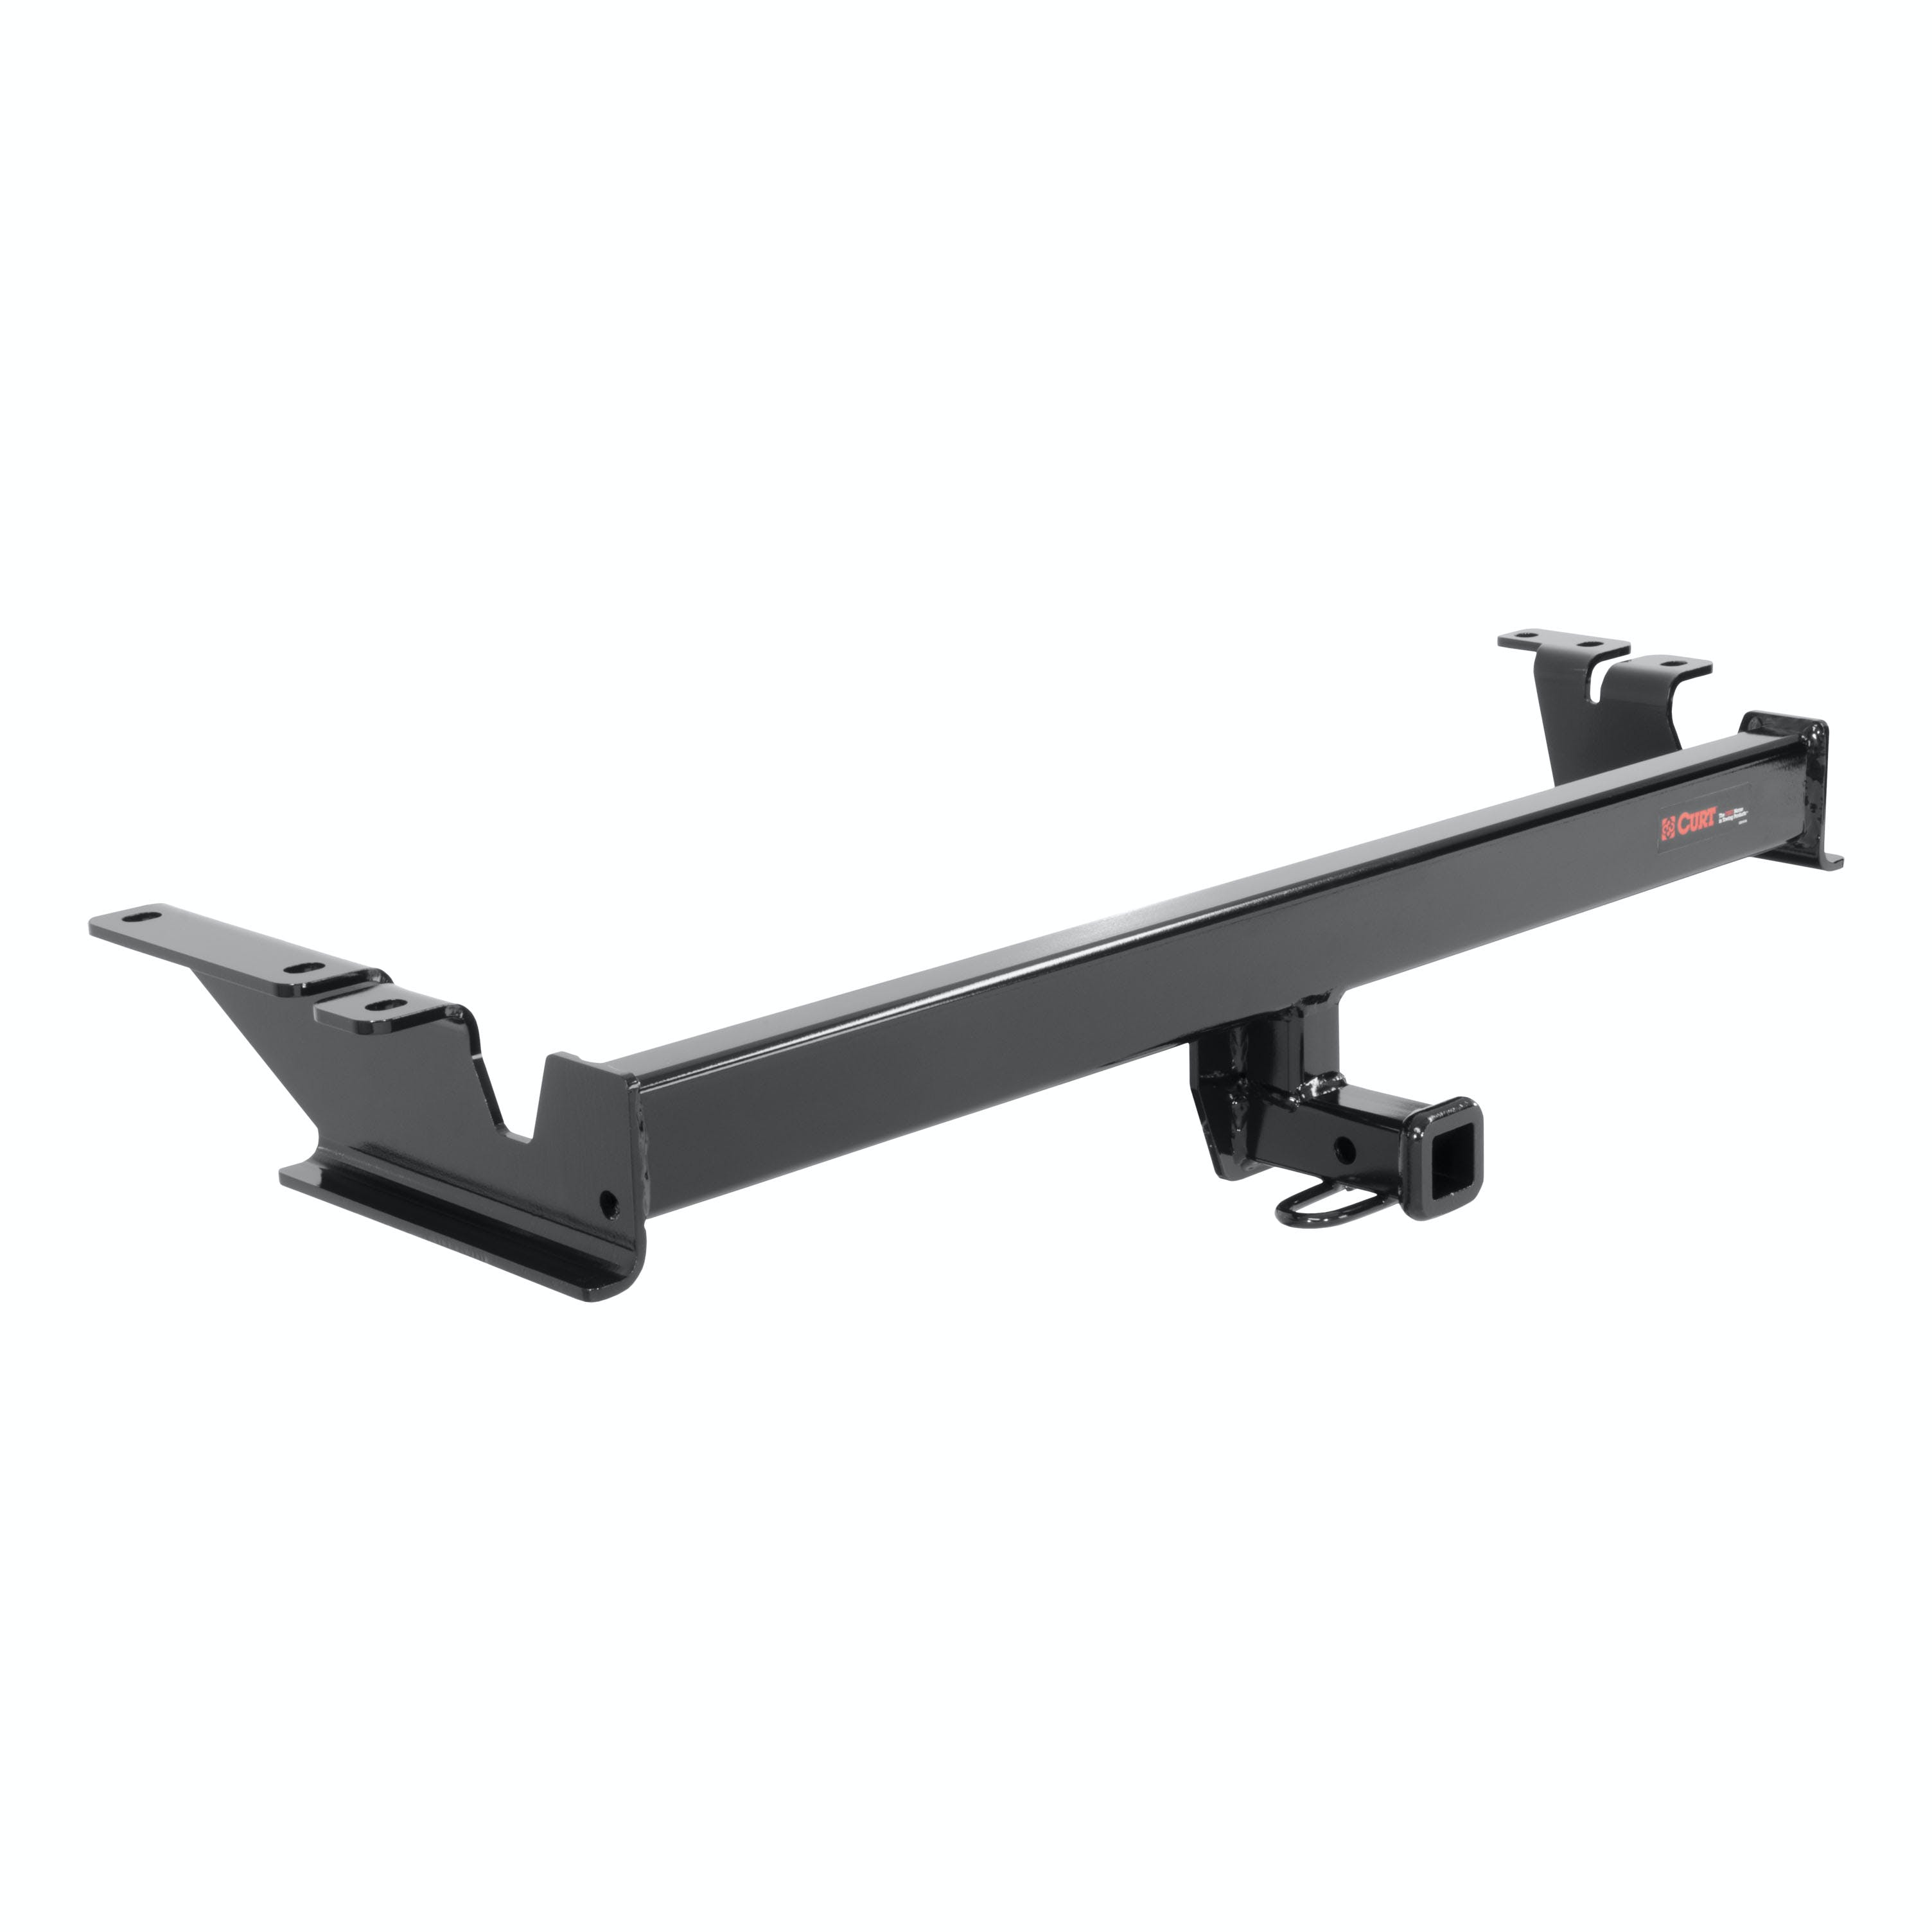 CURT 11433 Class 1 Trailer Hitch, 1-1/4 Receiver, Select Chevrolet Spark